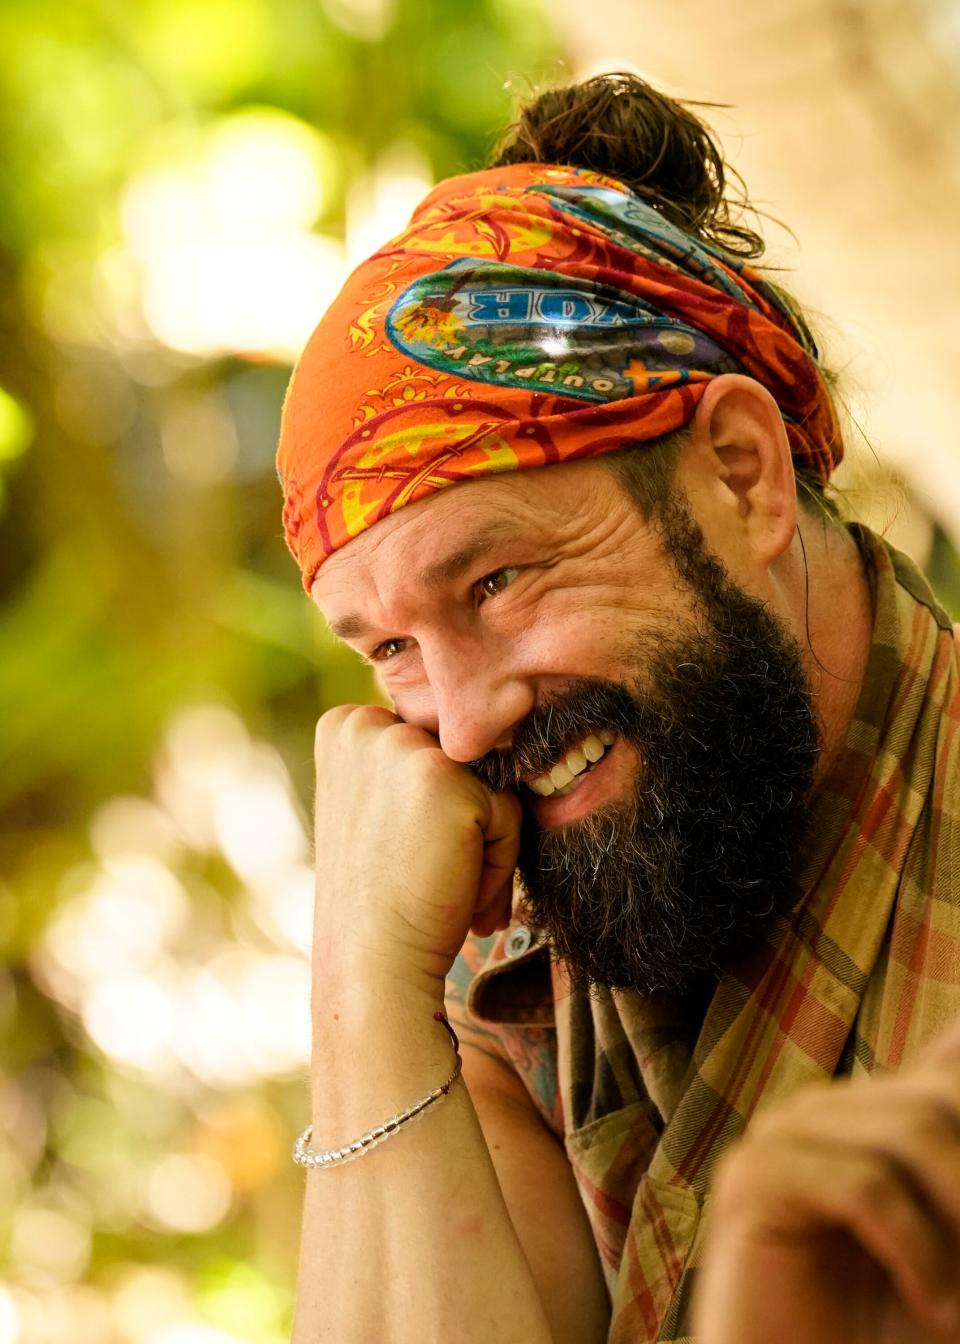 Matthew Grinstead-Mayle, of Columbus, is a contestant on the 44th season of "Survivor."